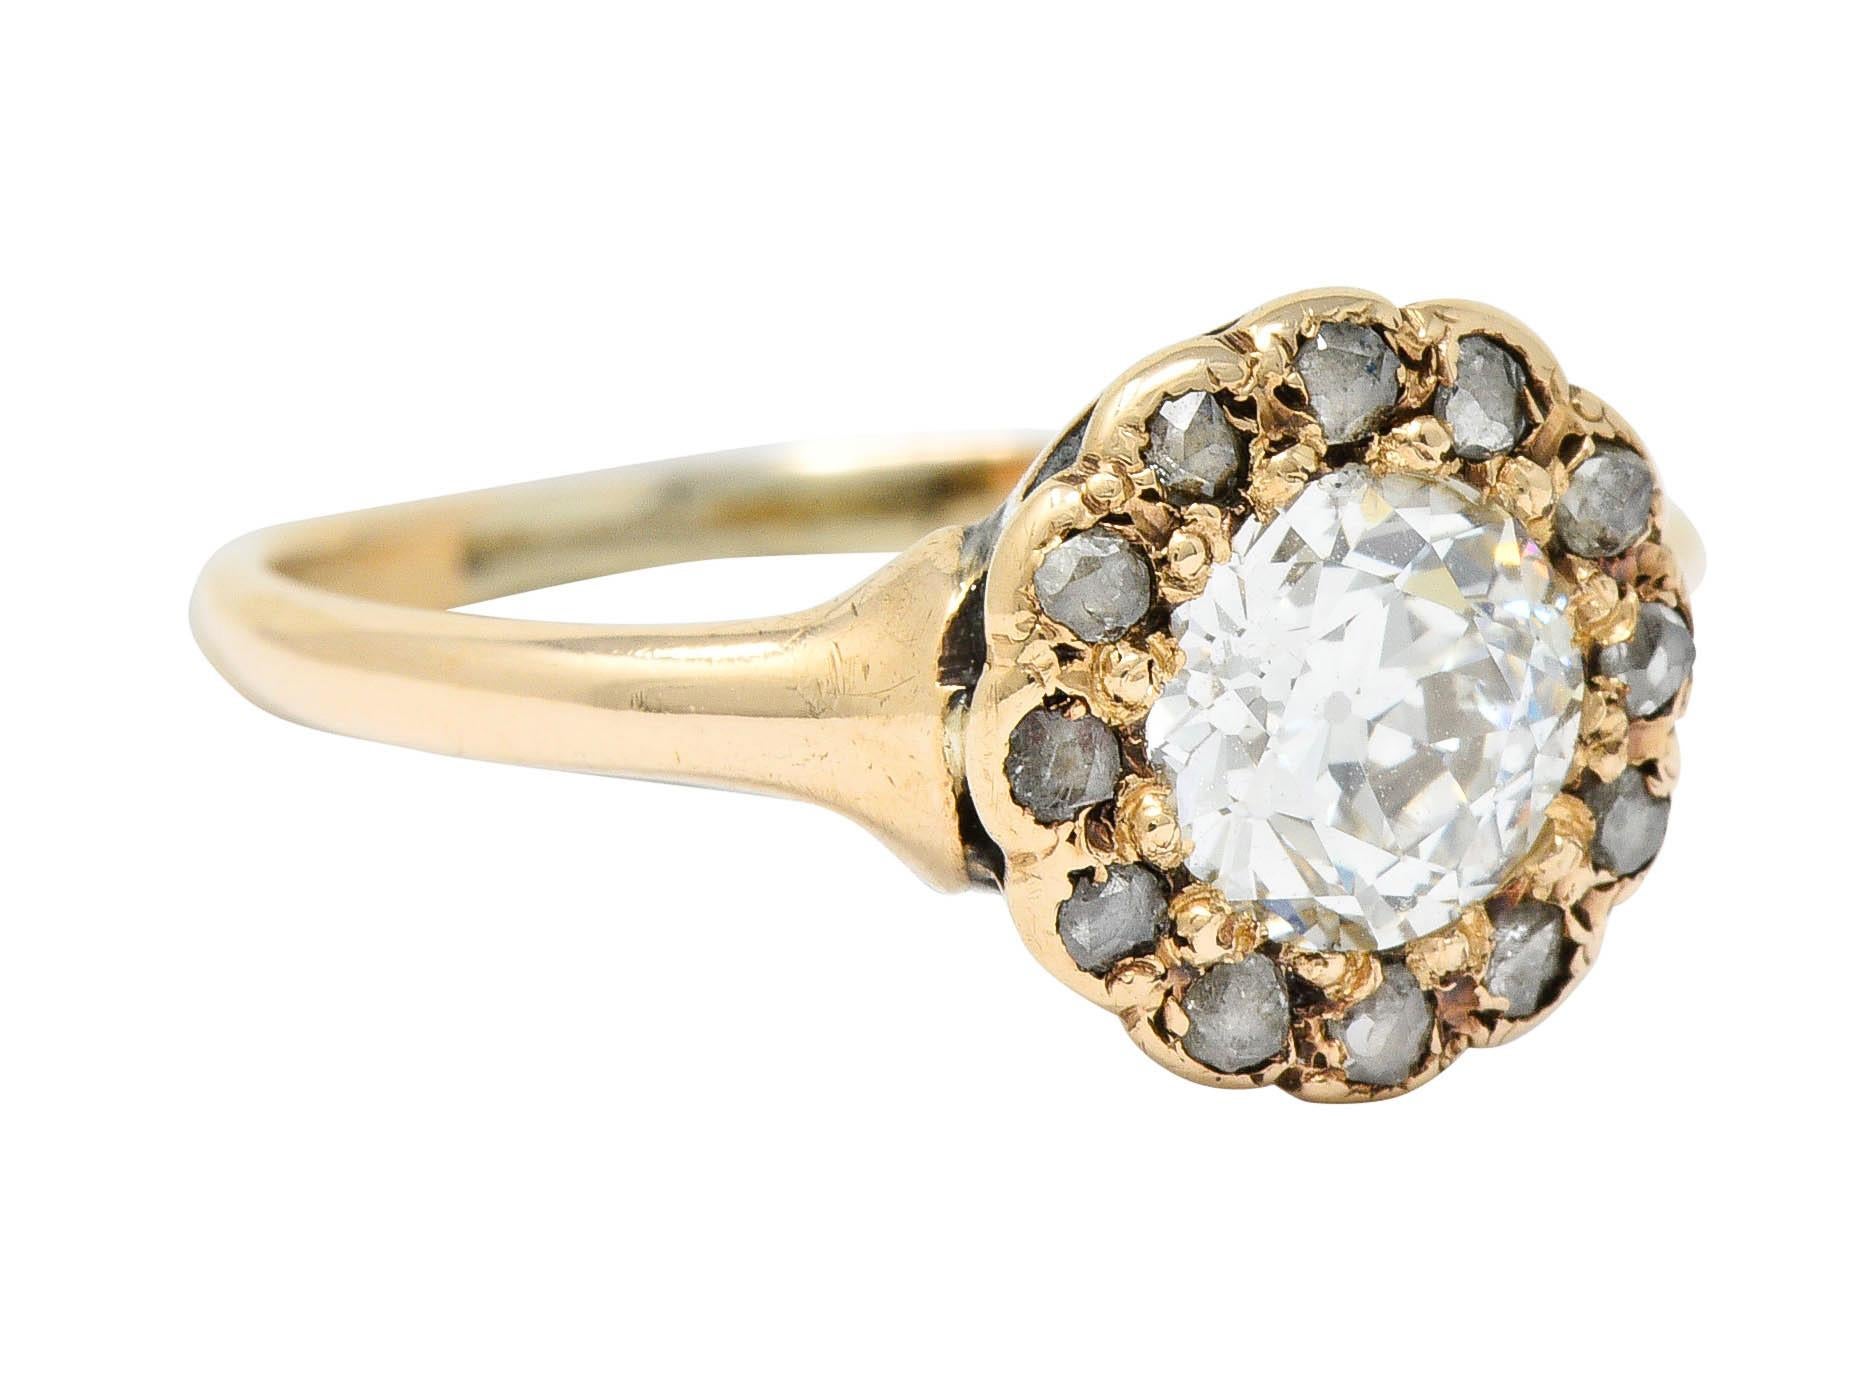 Cluster style ring centers an old European cut diamond weighing approximately 0.65 carat; J color with VS clarity

Surrounded by a halo of rose cut diamonds weighing in total approximately 0.20 carat

Tested as 14 karat gold

Circa: 1900

Ring Size: